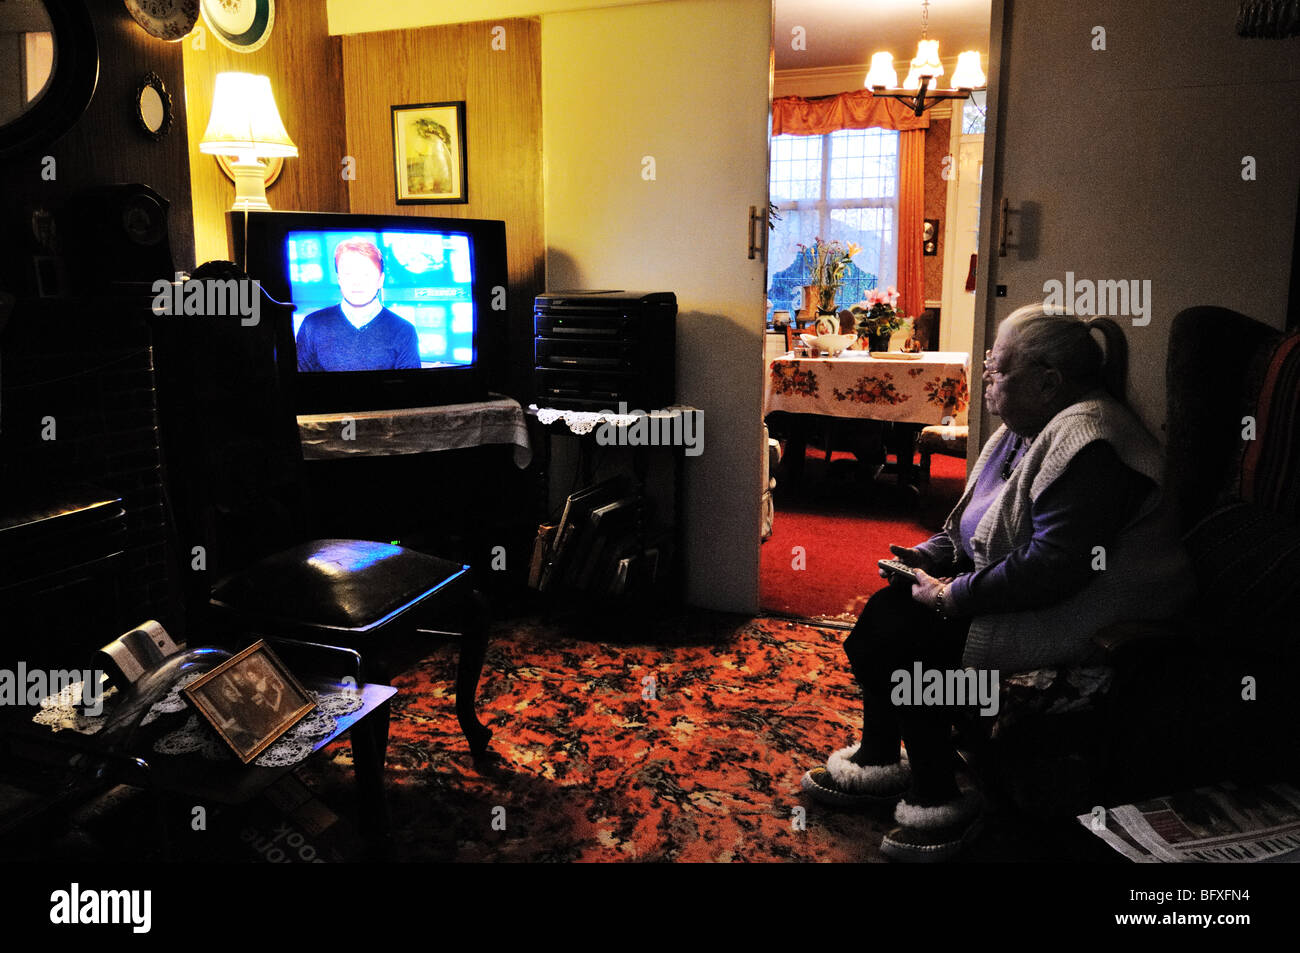 Old lady watching television Stock Photo